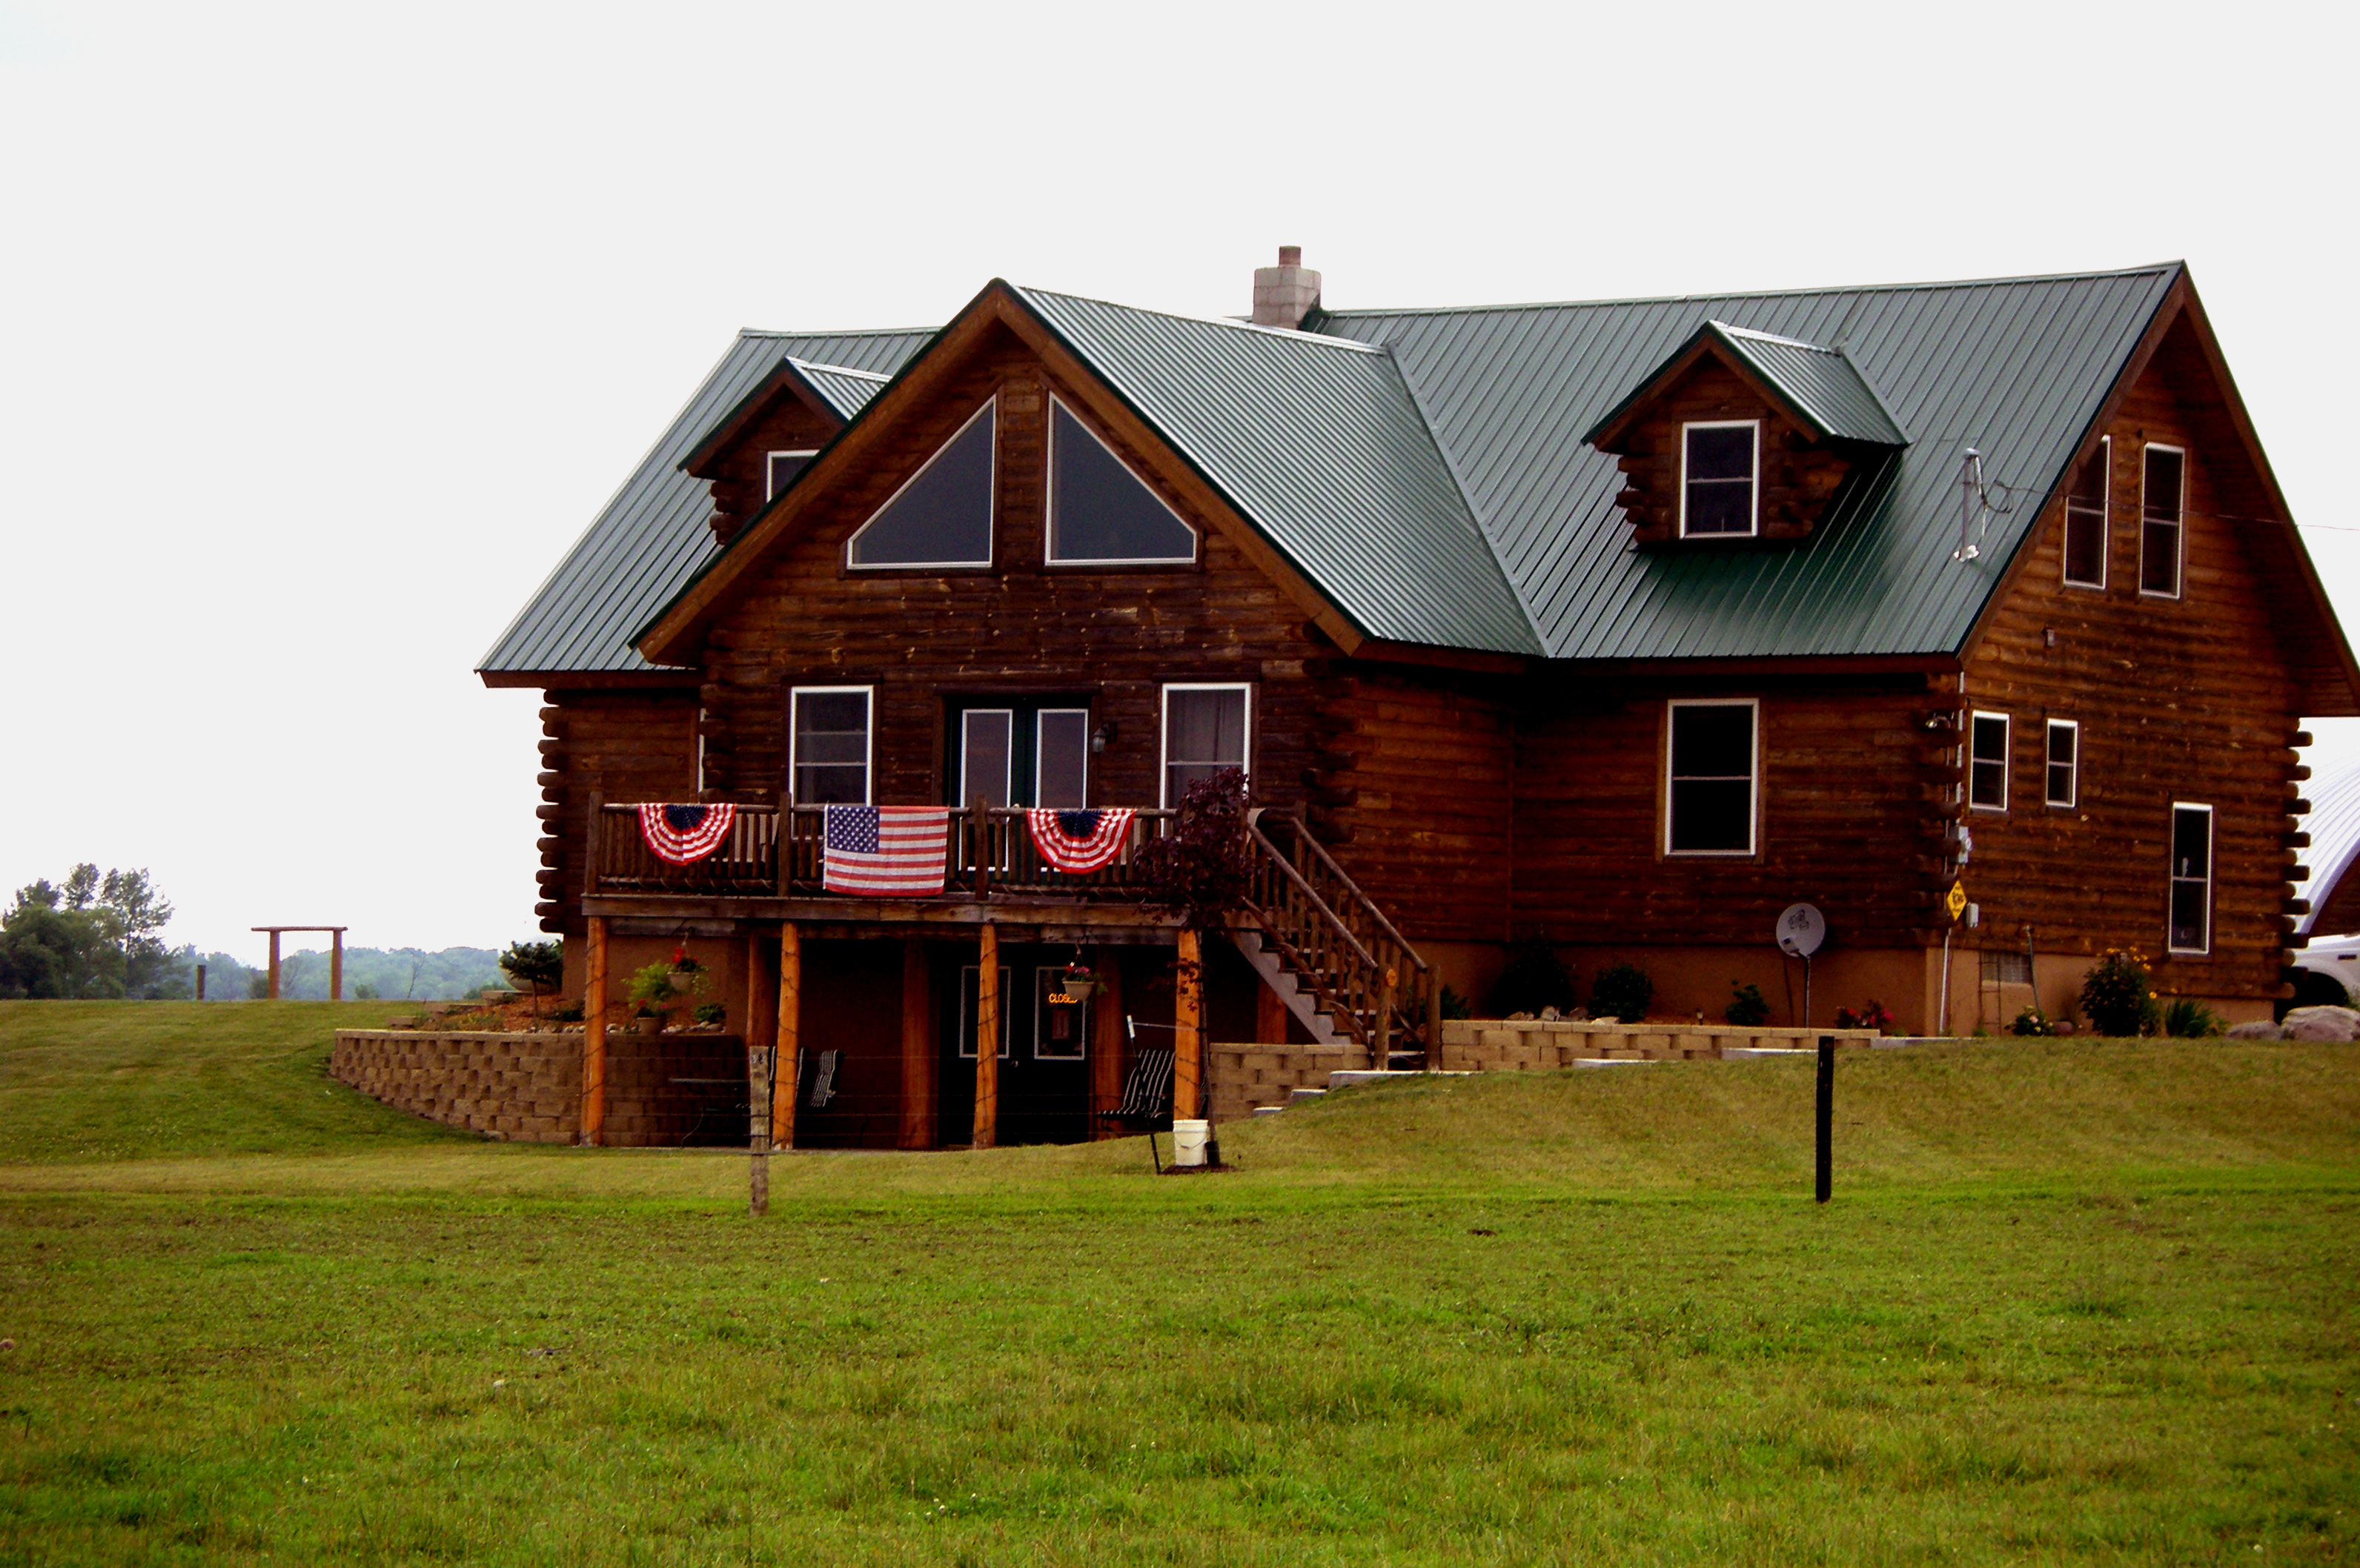 Pohl Bison and Bed & Breakfast, bed and breakfast in Rosebush, Michigan with a cozy Amish-built log home and bison ranch.